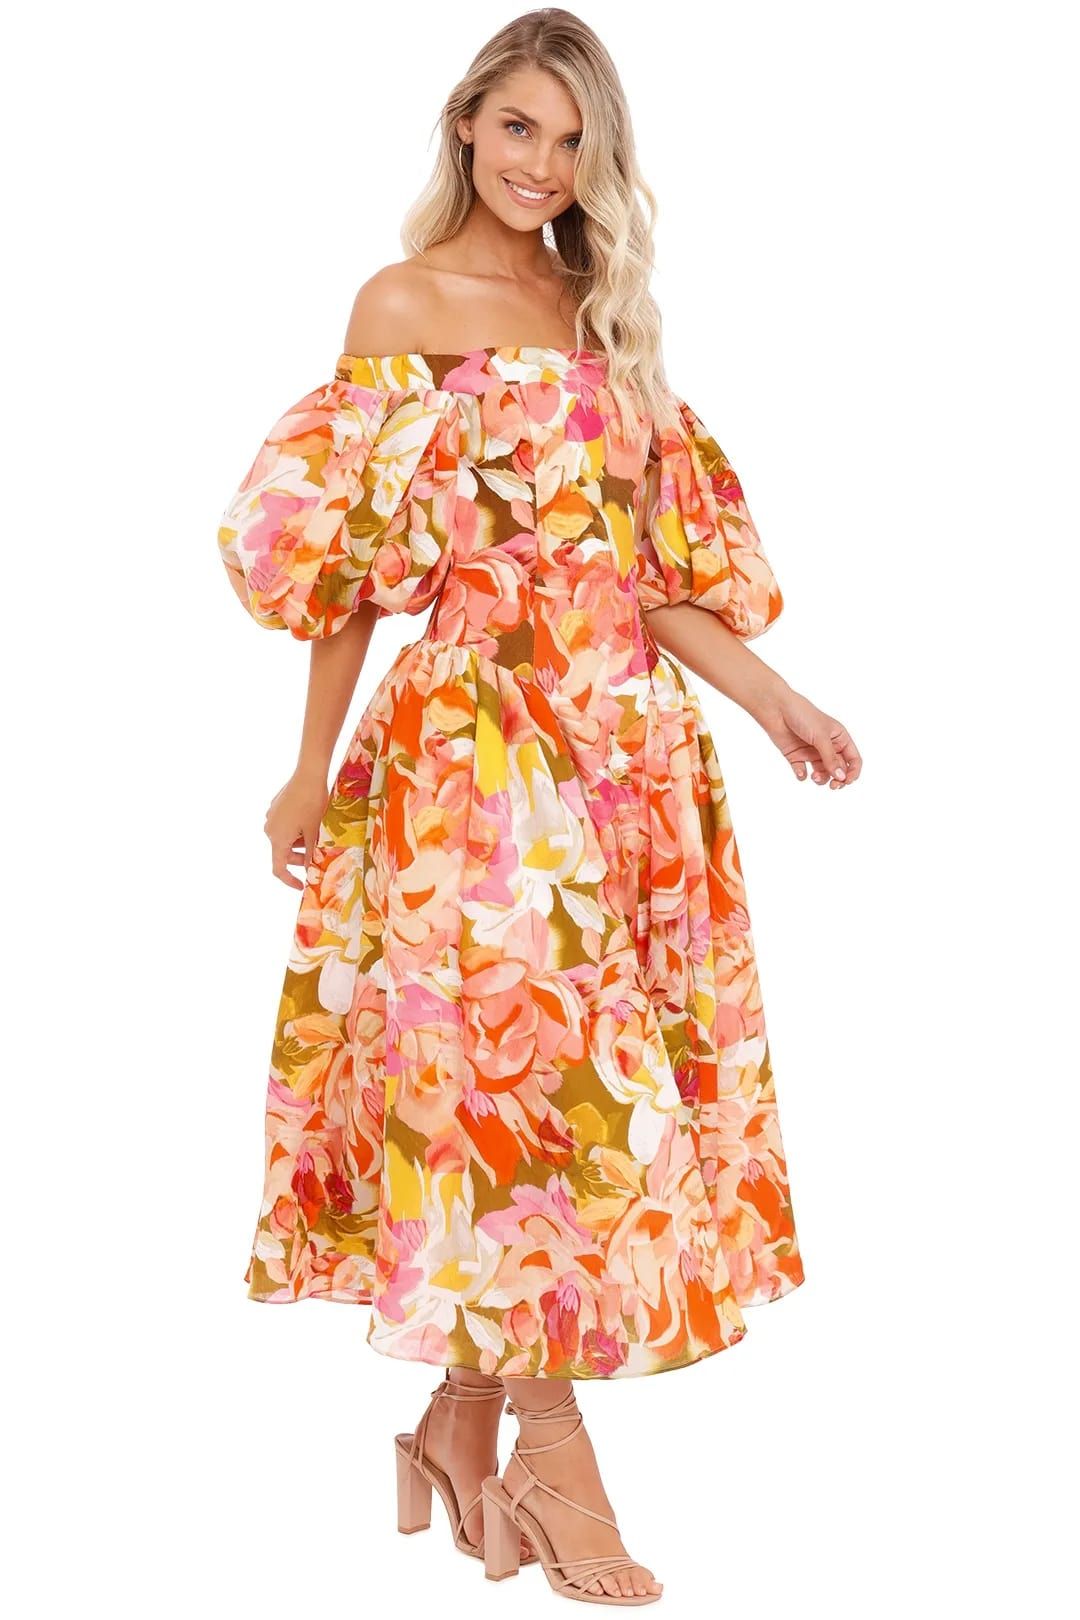 Rent Porter dress in pink bouquet for spring events.